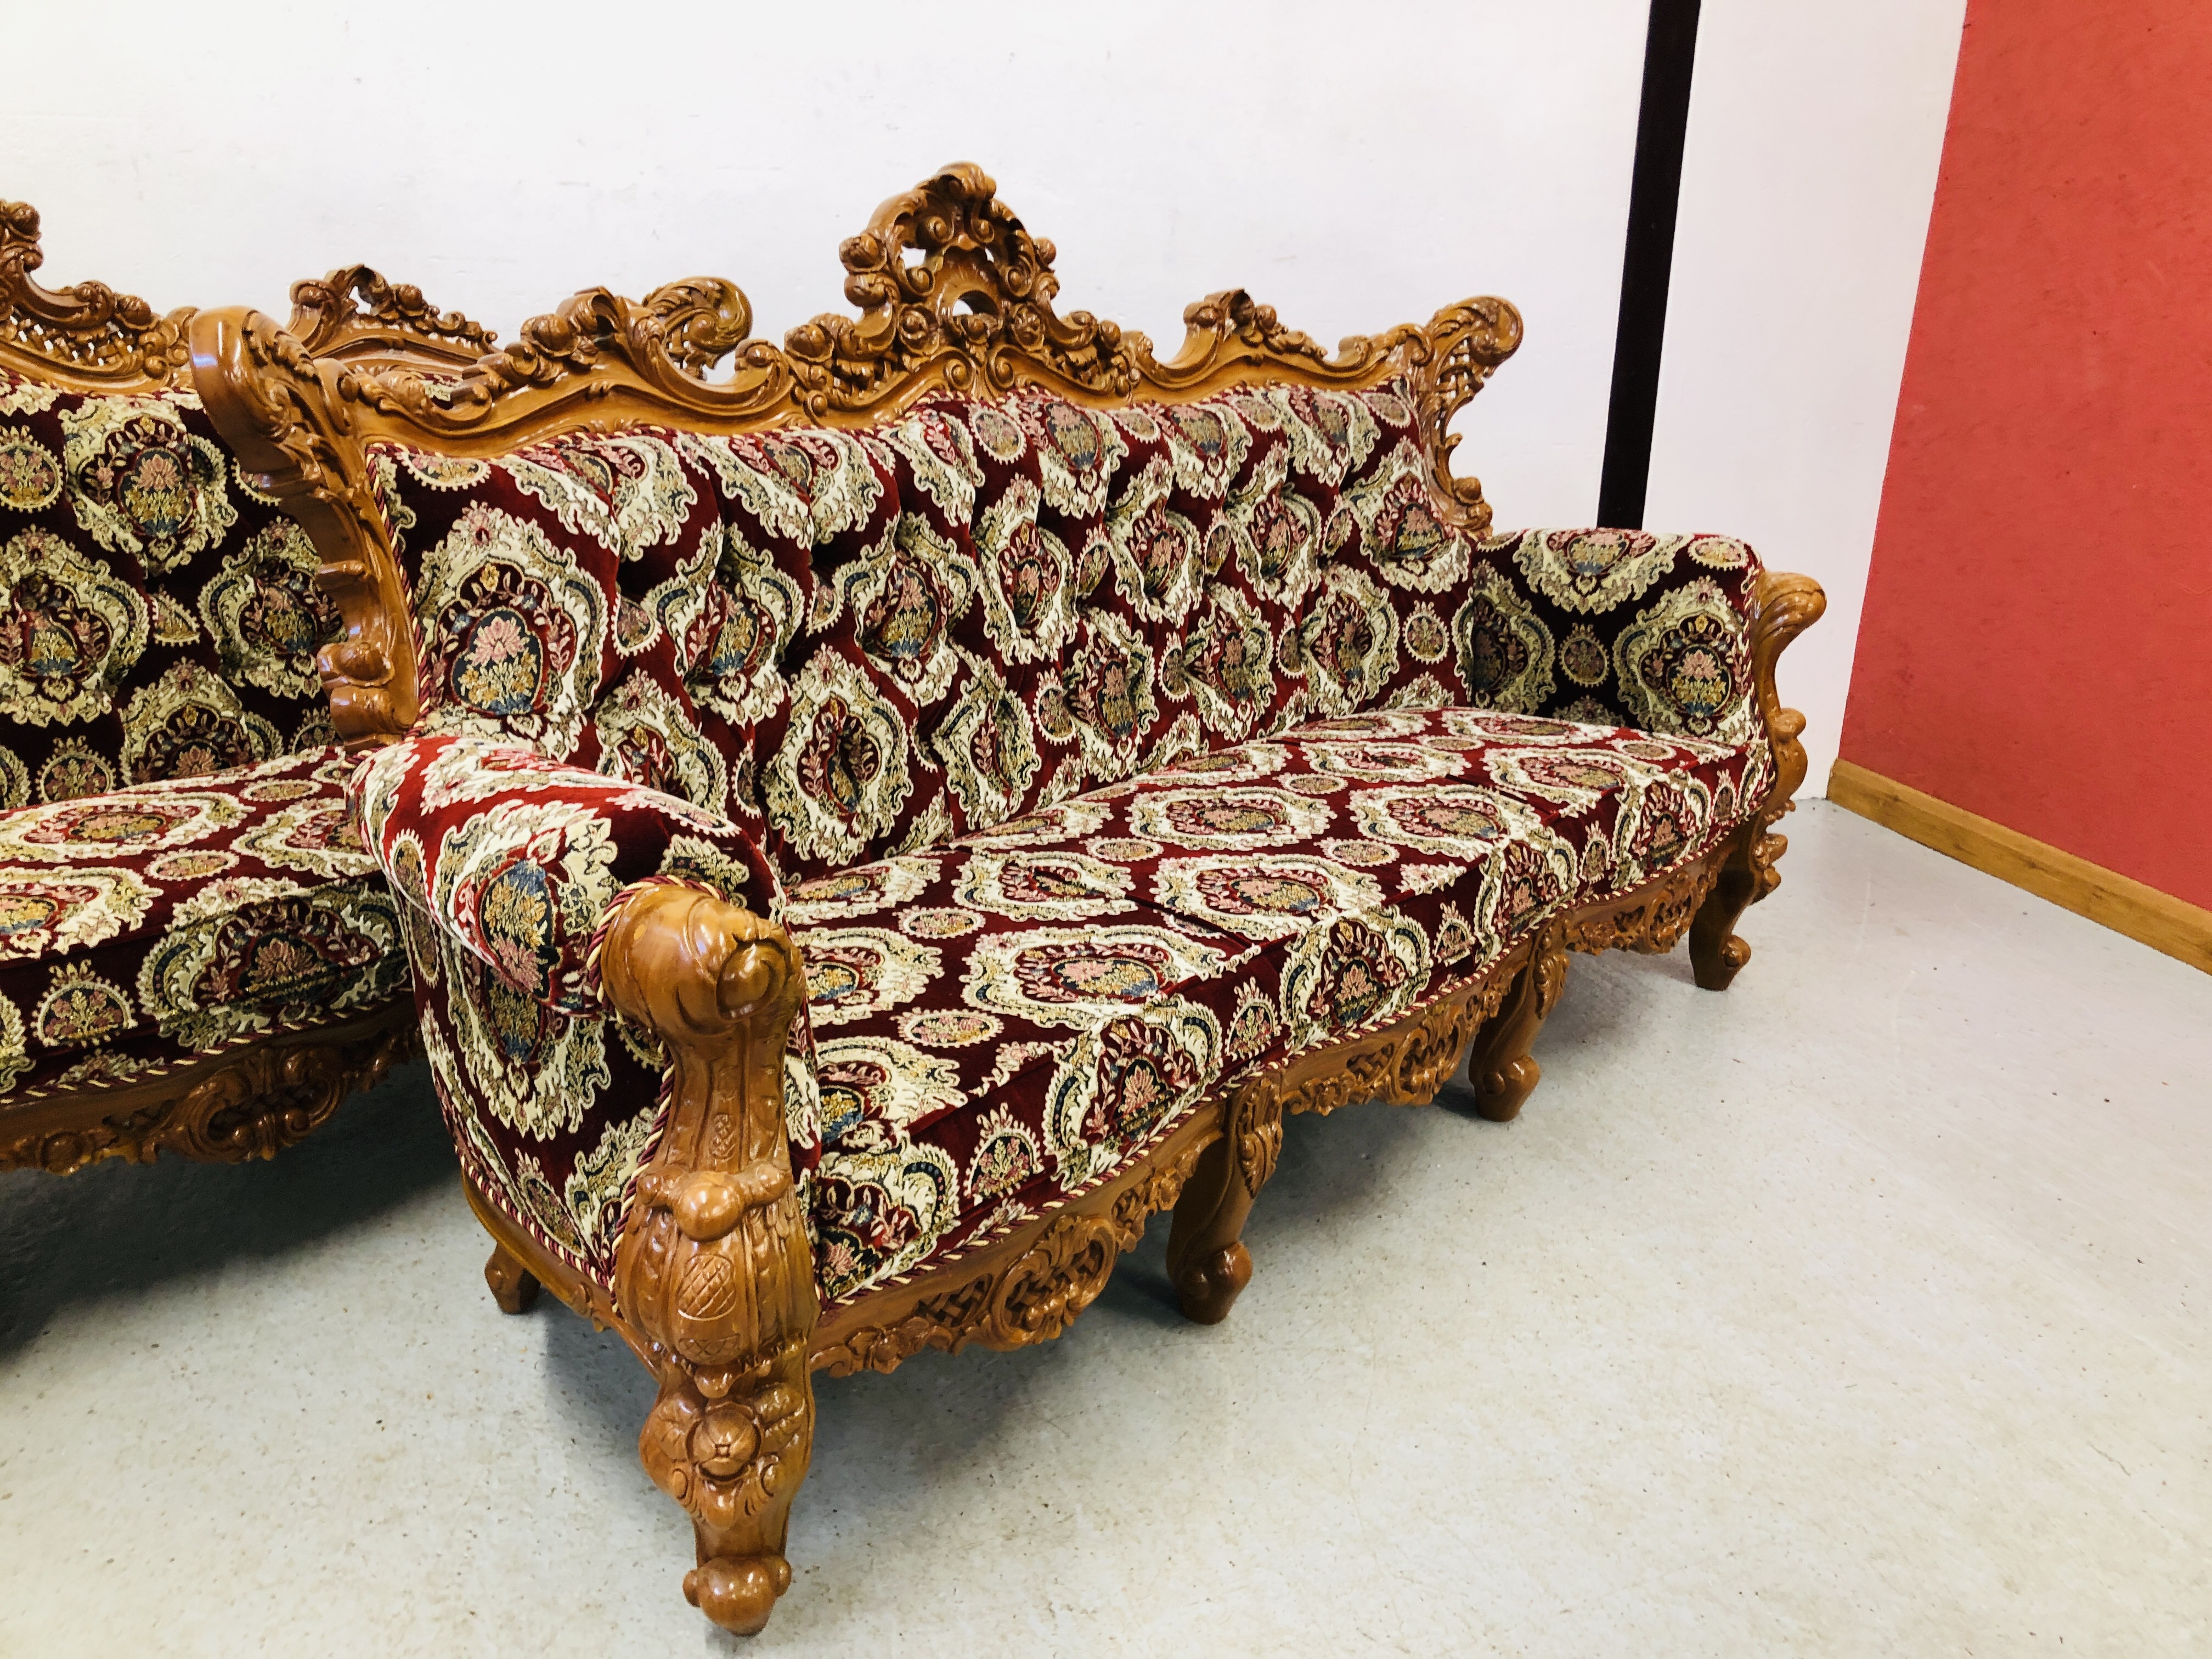 A PAIR OF HIGHLY DECORATIVE REPRODUCTION CONTINENTAL STYLE THREE SEATER COUCHES - NON COMPLIANT - Image 8 of 14